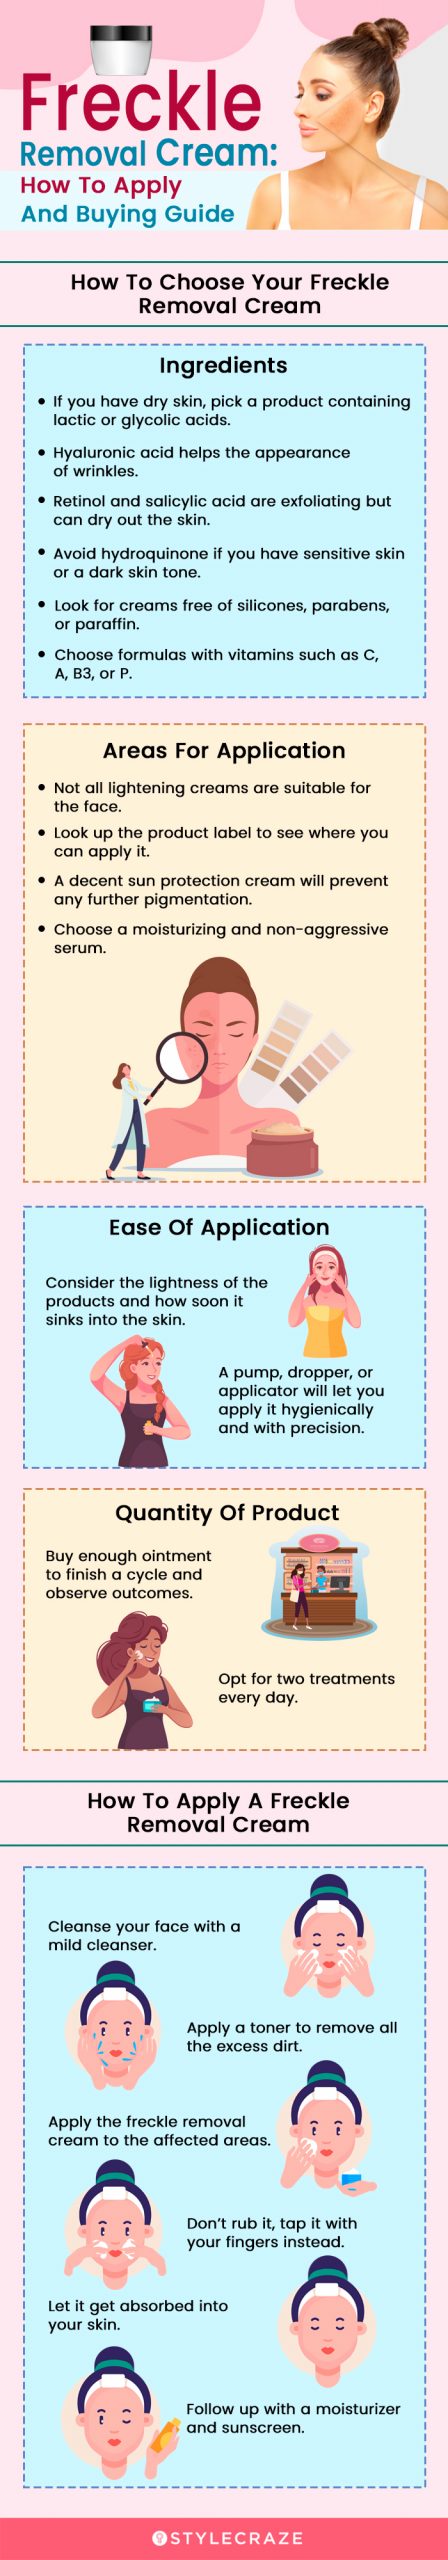 Freckle Removal Cream (infographic)